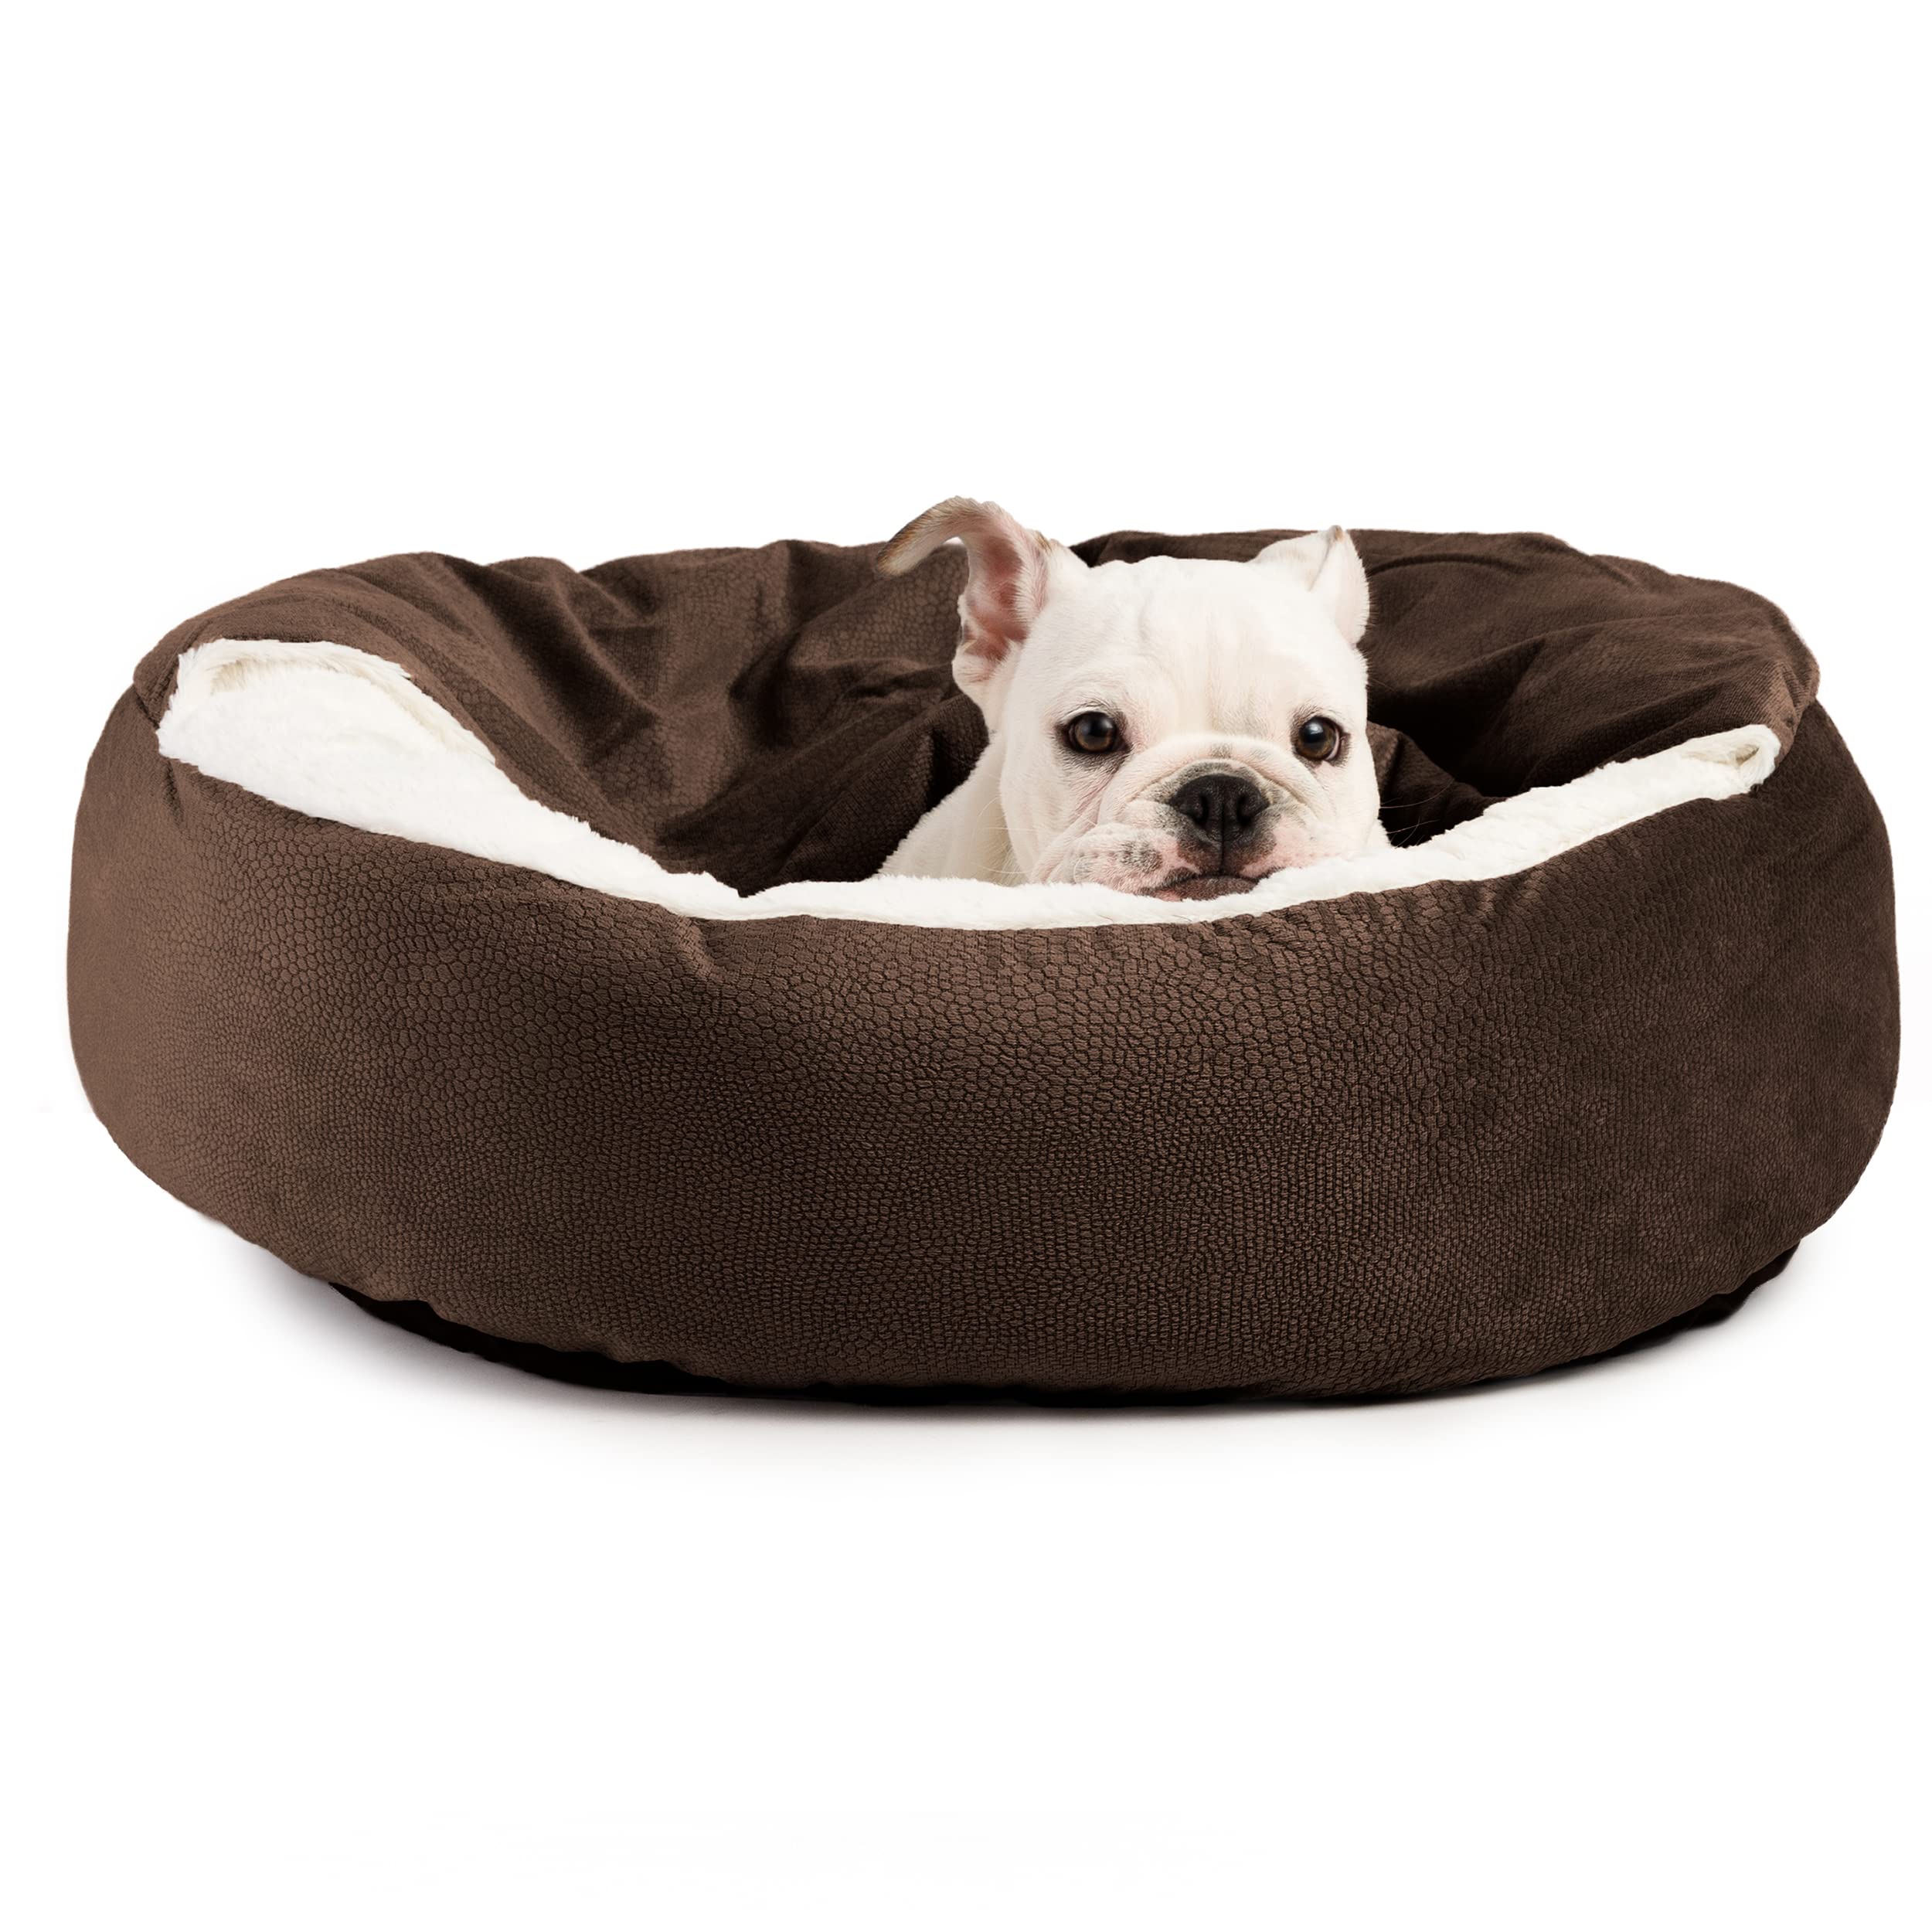 26" x 26" Best Friends by Sheri Cozy Cuddler Microfiber Hooded Blanket Cat & Dog Bed (Dark Chocolate) $18.45 + Free Shipping w/ Prime or on $25+